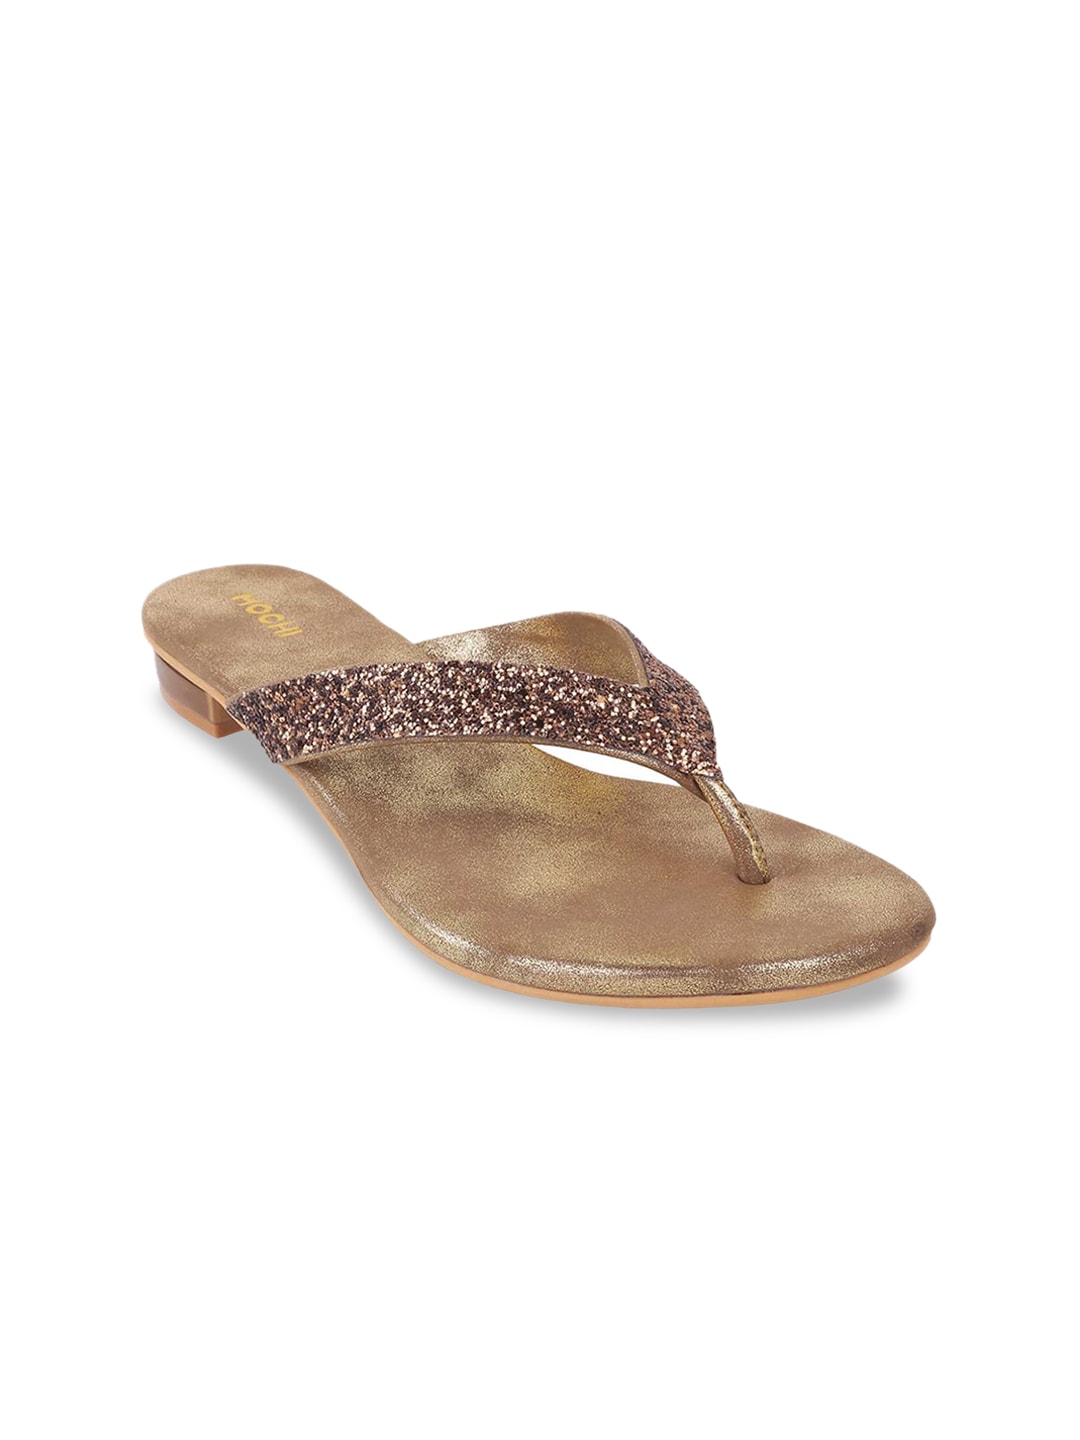 Mochi Women Gold-Toned Embellished Open Toe Flats Price in India